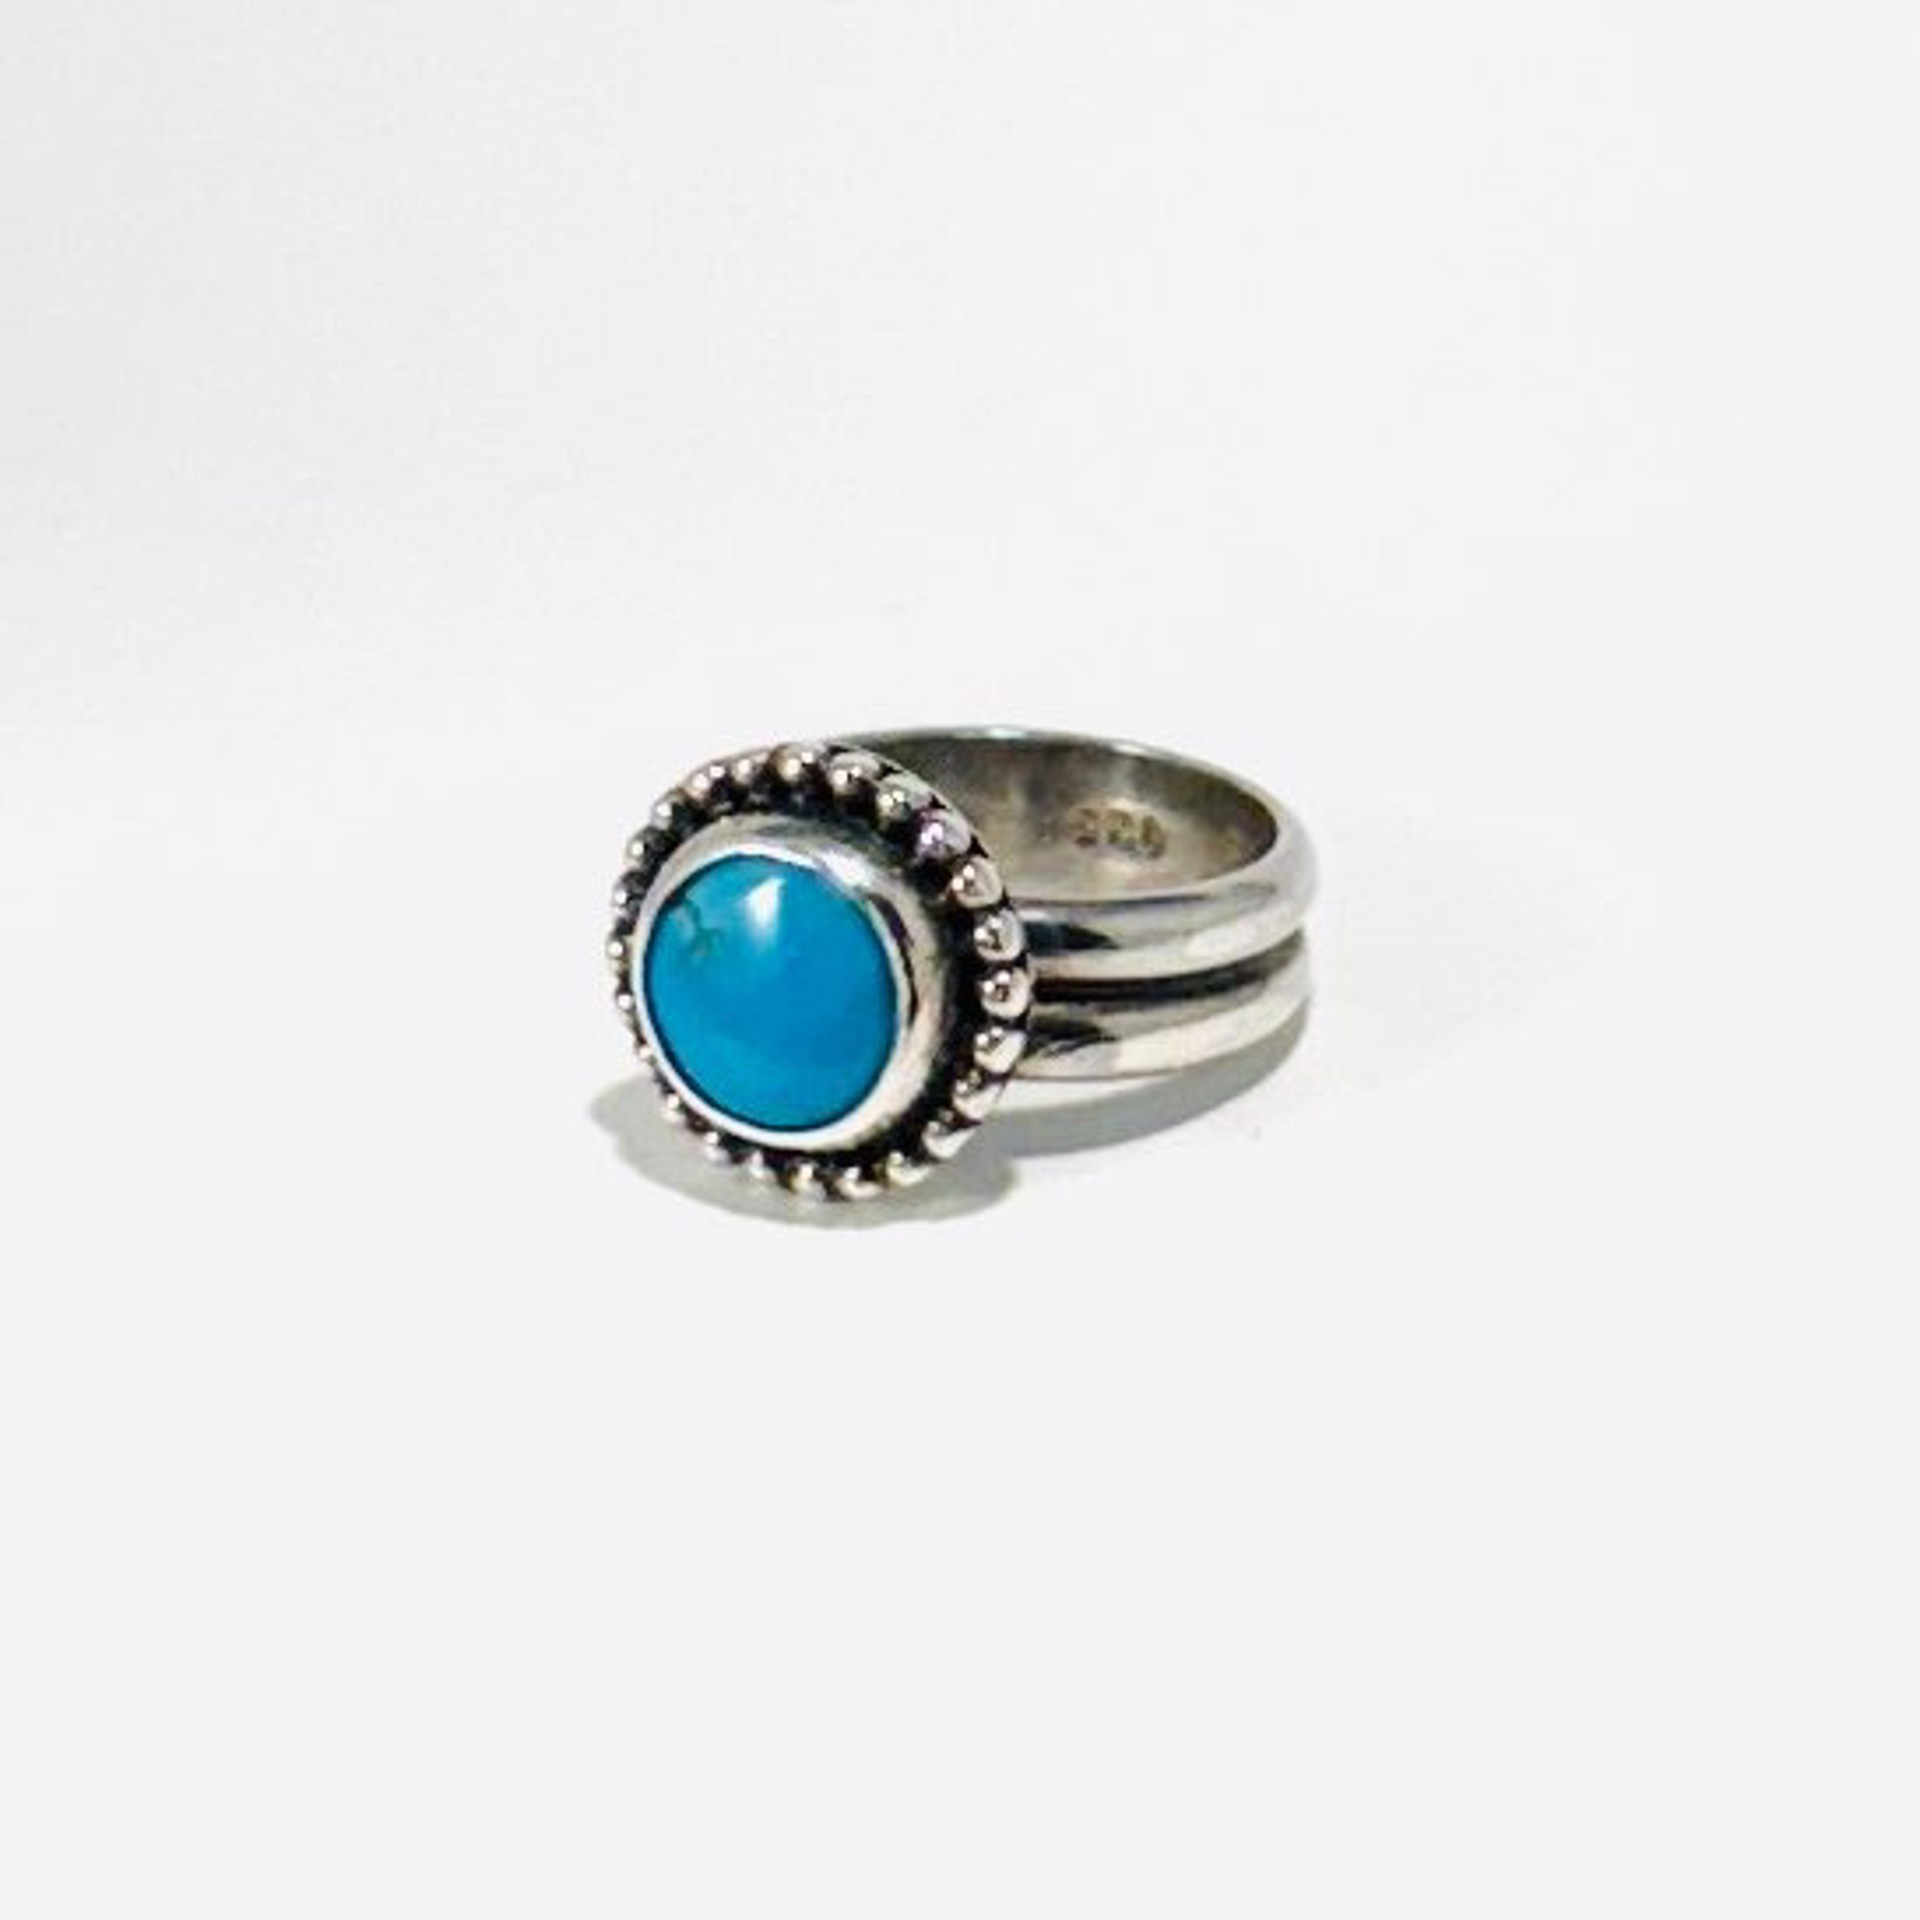 Bandit's Mine Turquoise Ring sz6 AB23-56 by Anne Bivens